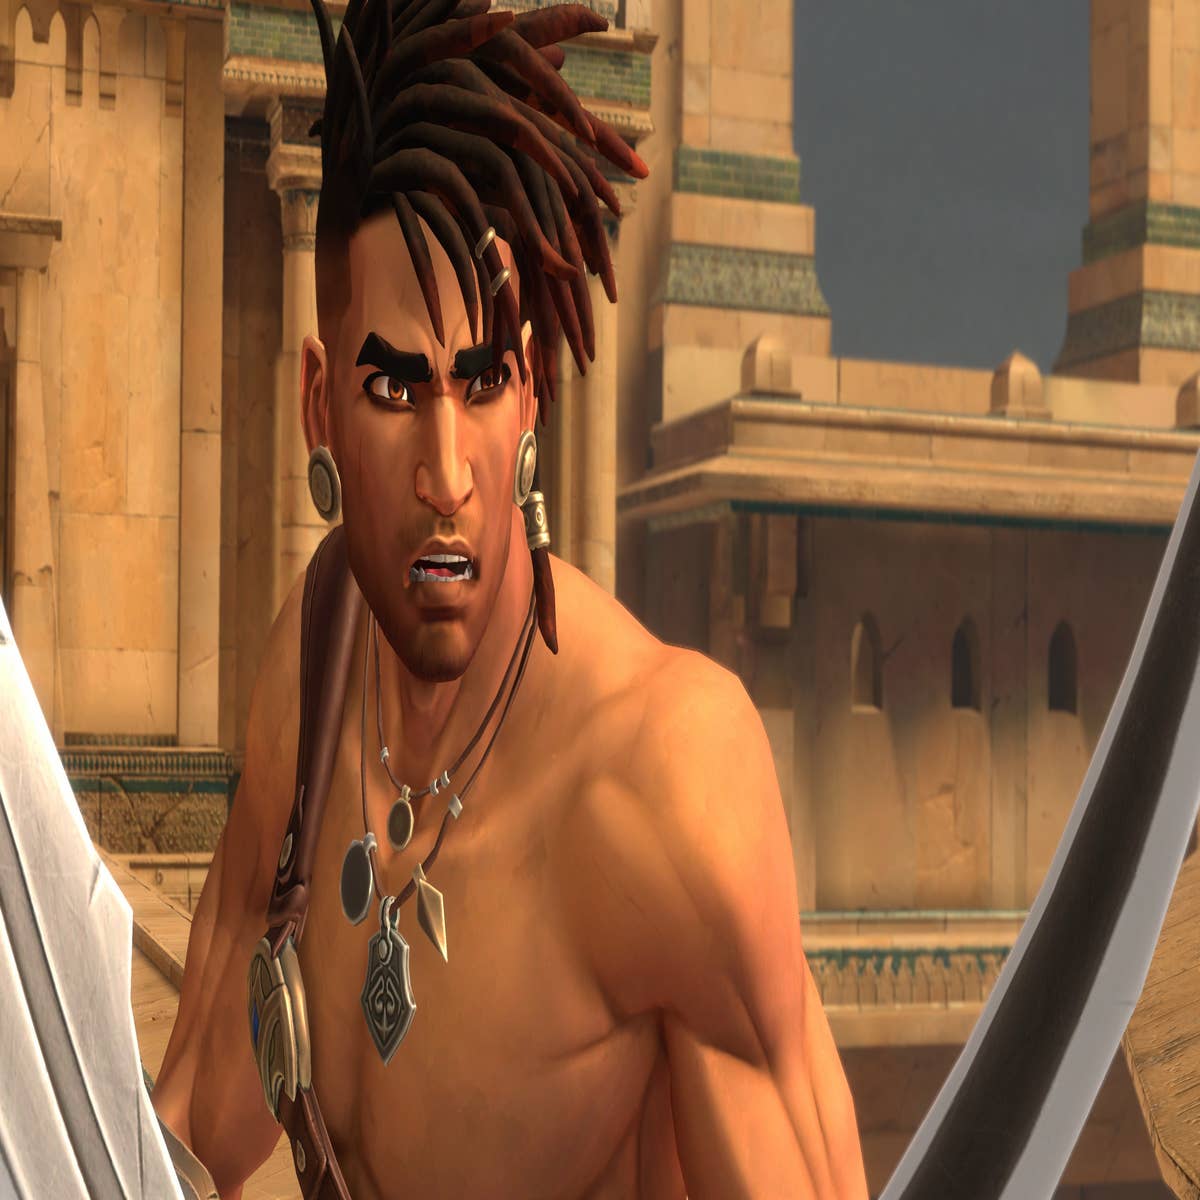 Prince of Persia: The Lost Crown leaked trailer includes demo